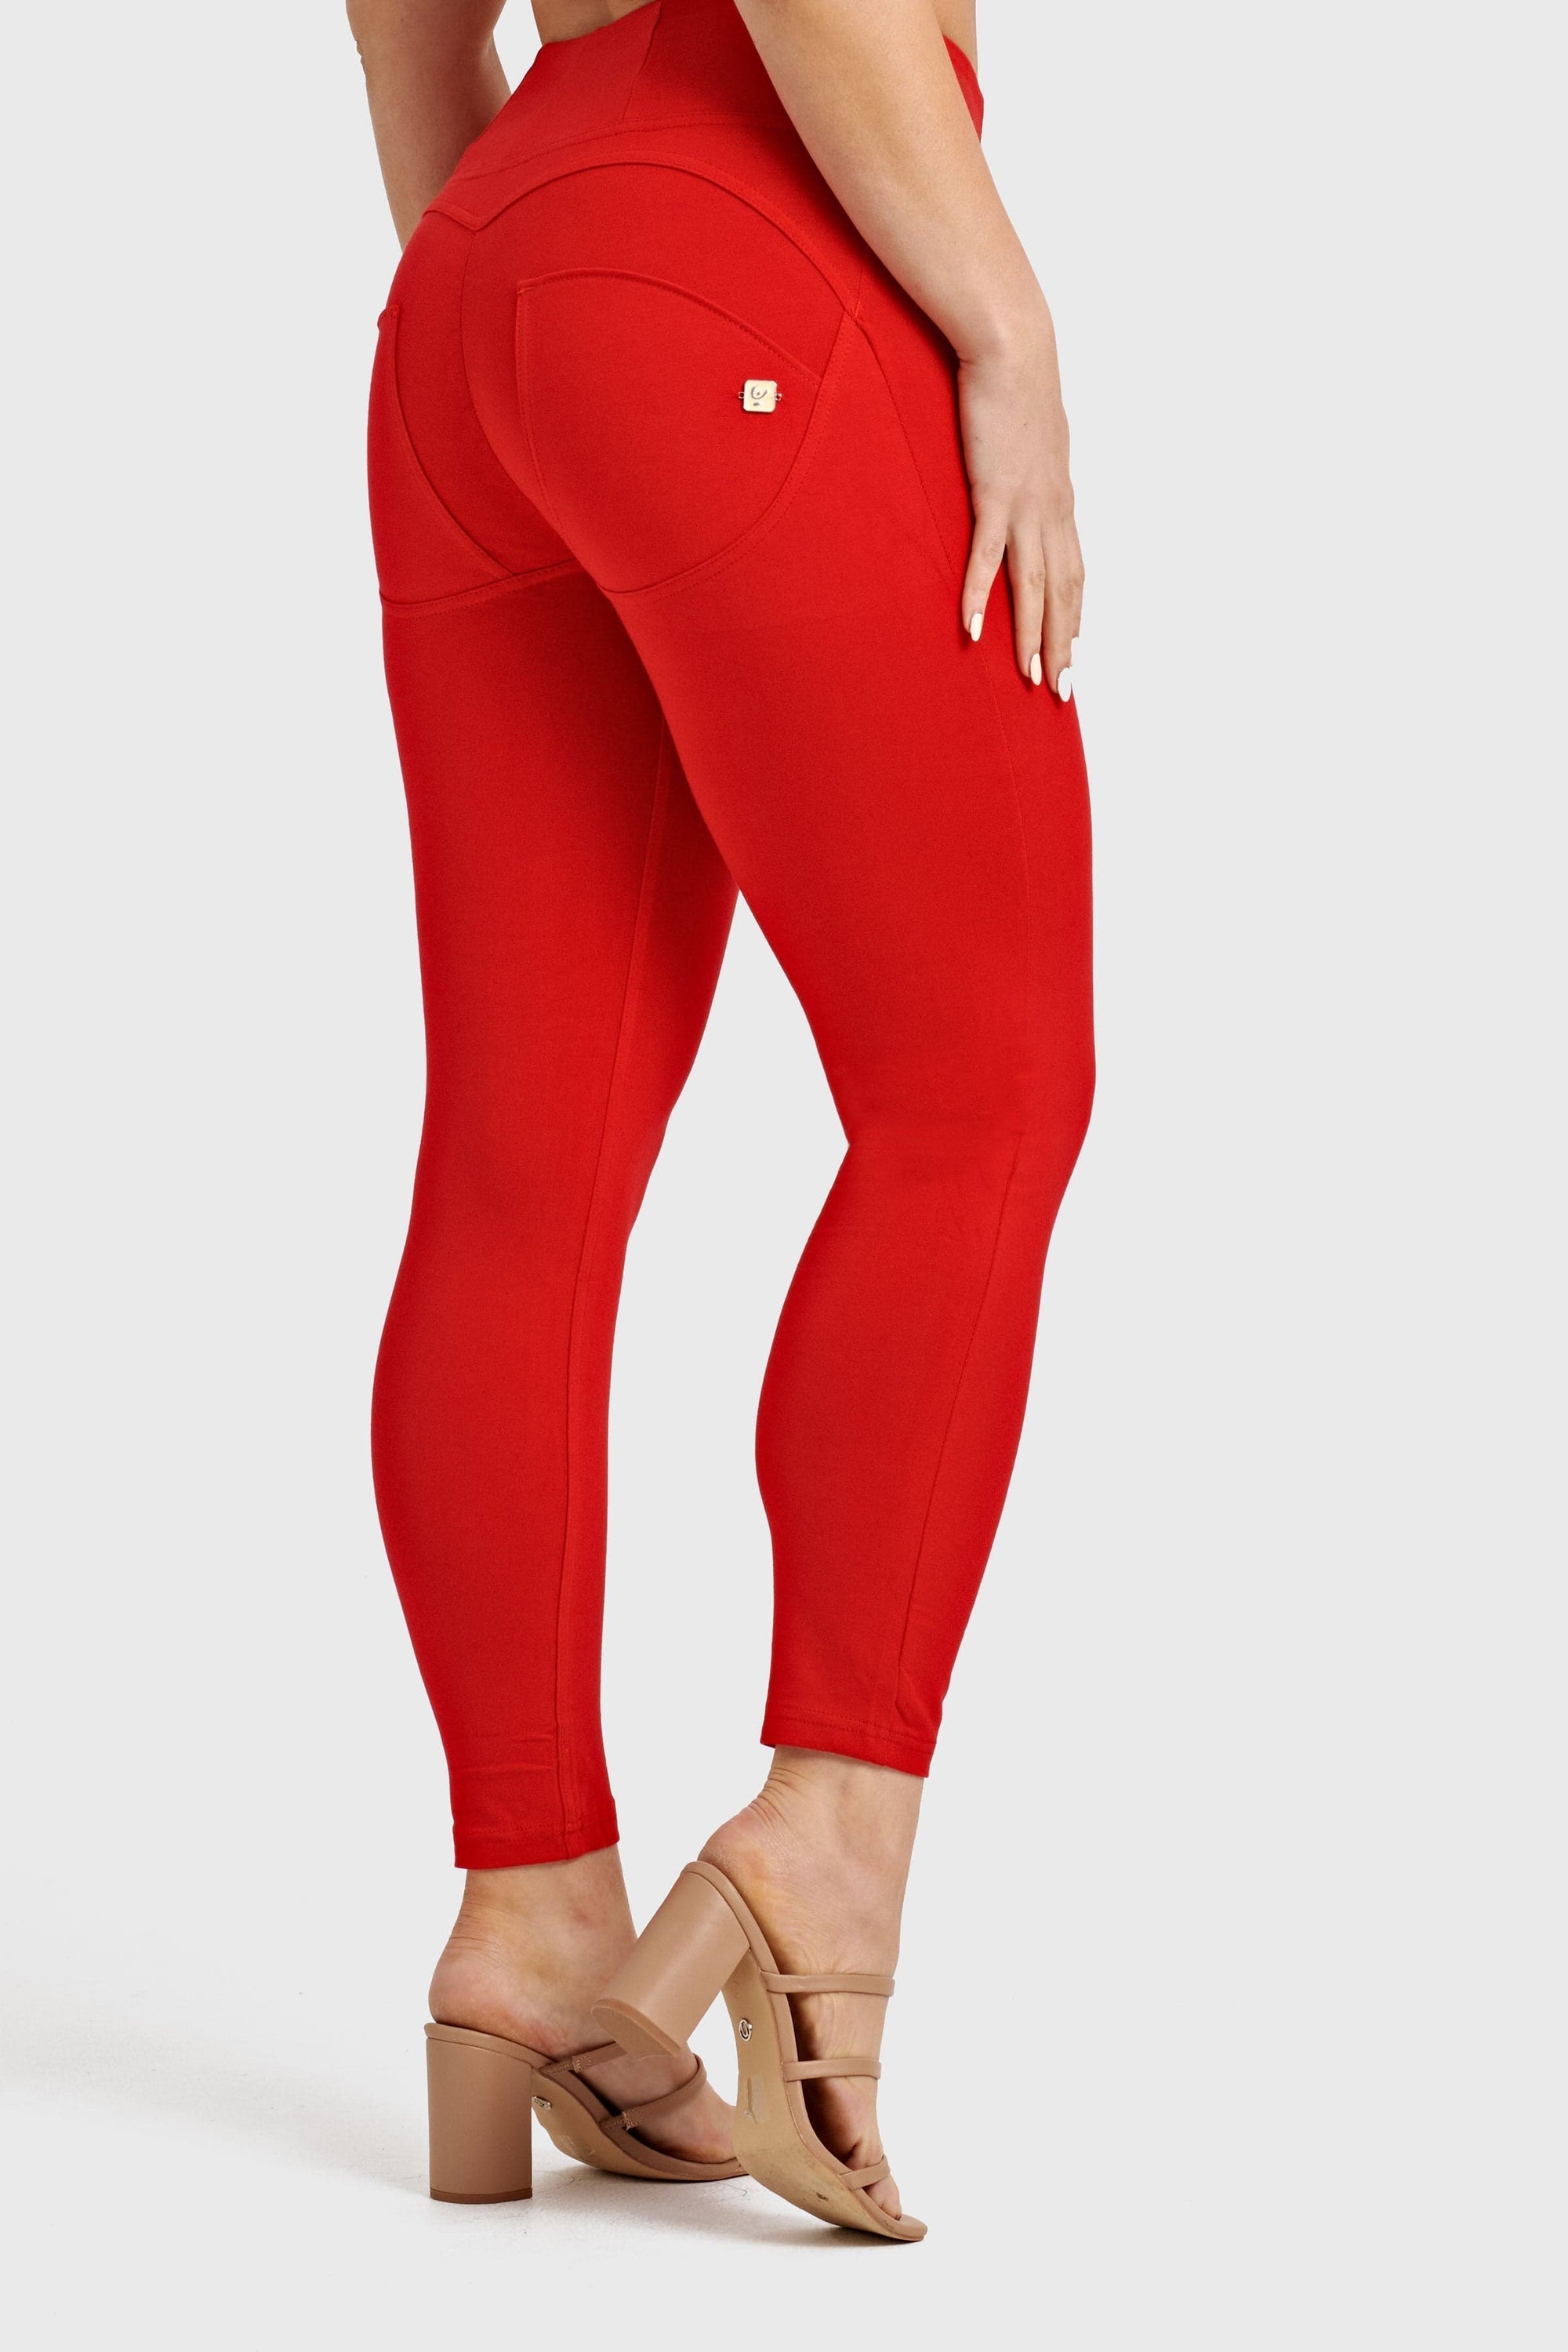 WR.UP® Fashion - High Waisted - Full Length - Red 12